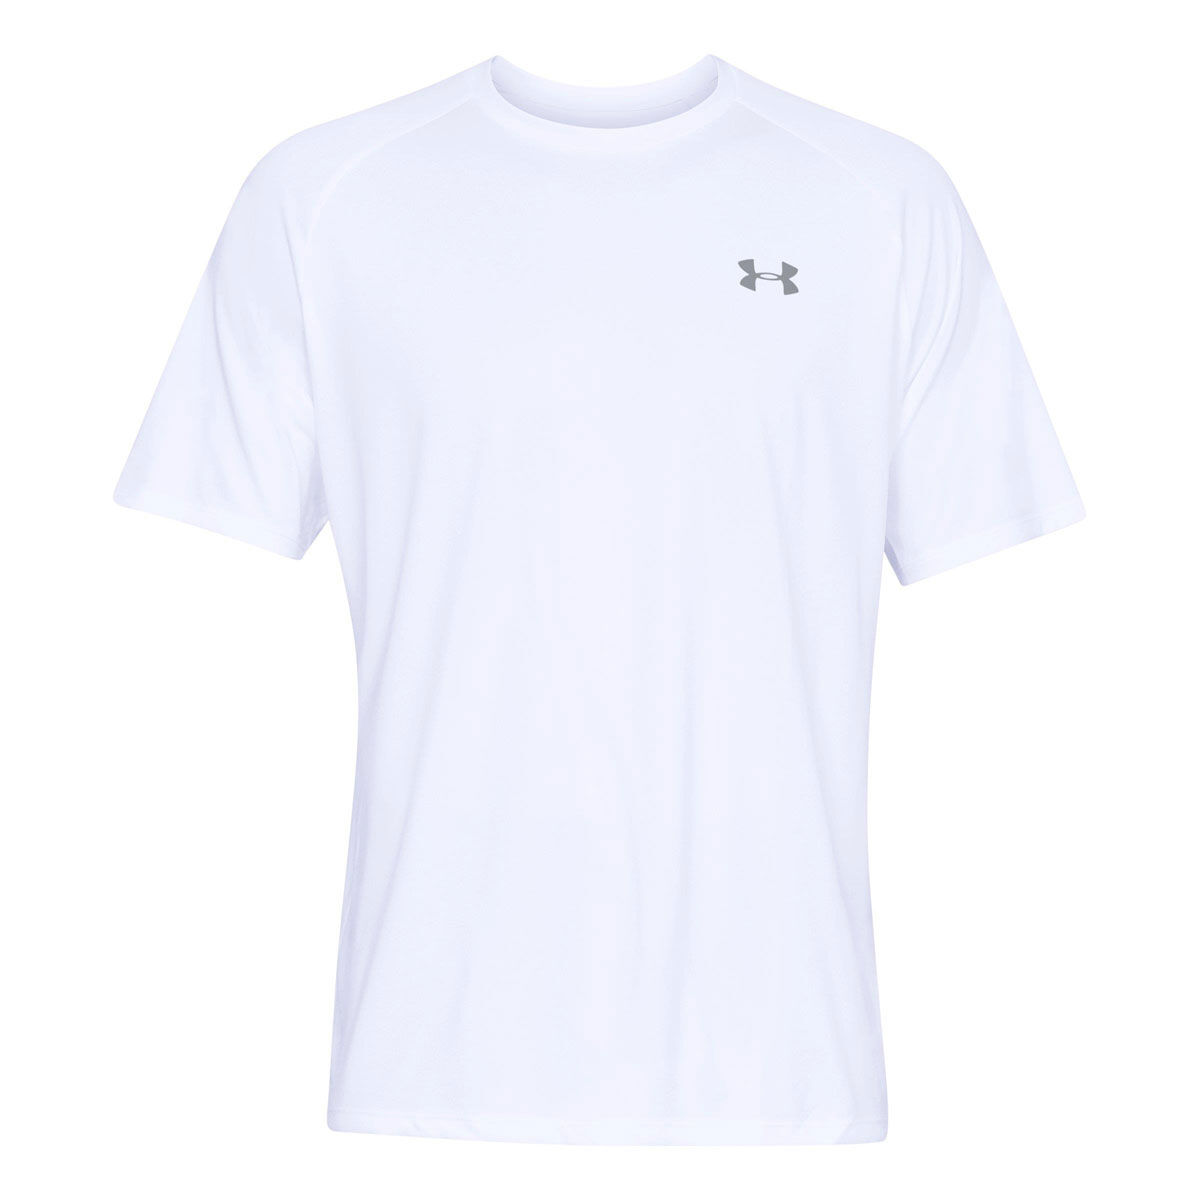 Under Armour Mens Tech 2.0 Training Tee White S